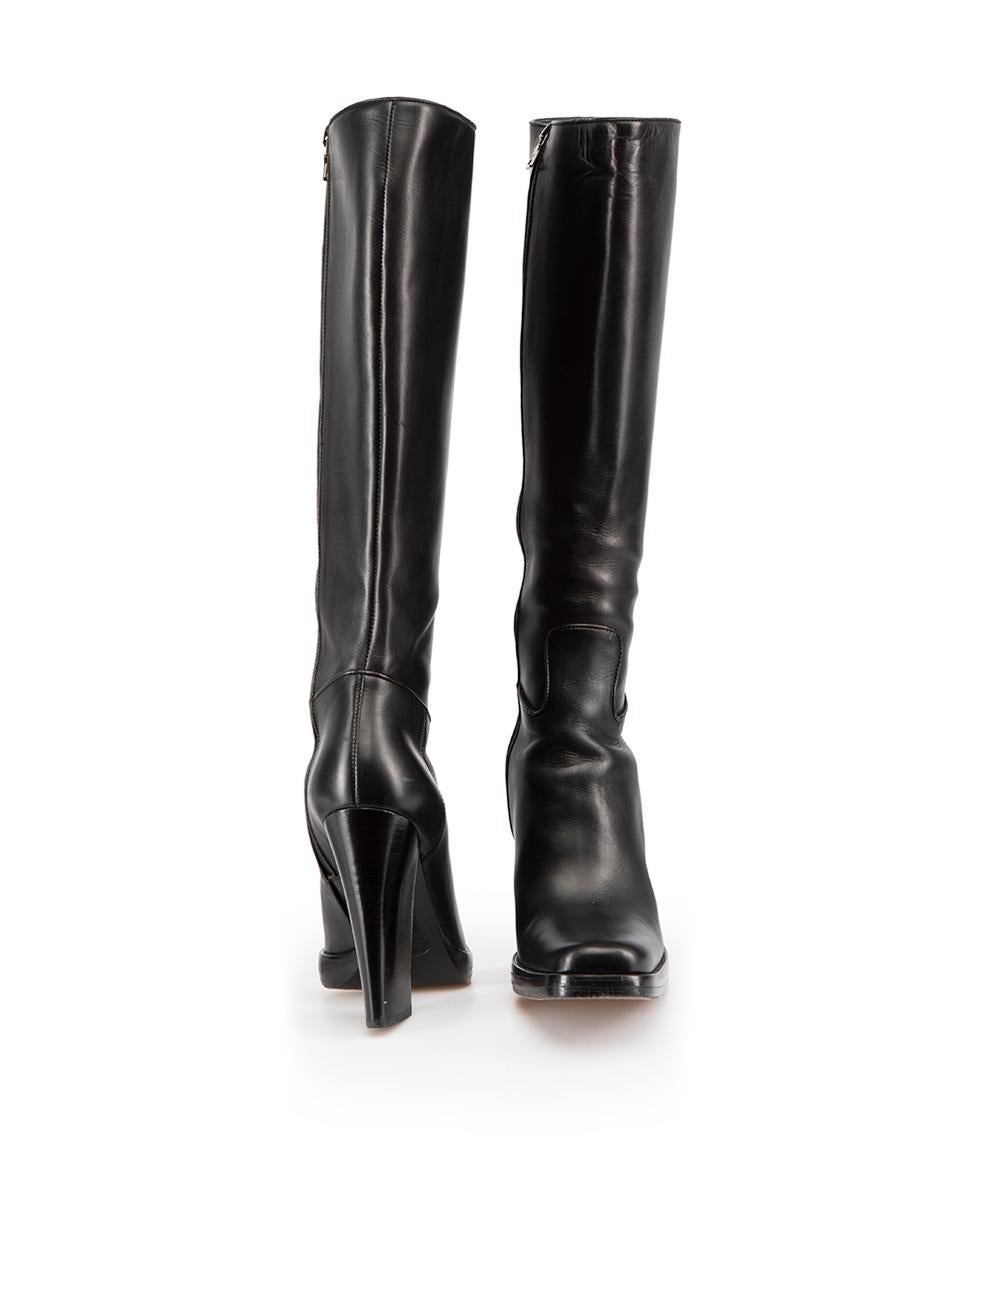 Prada Black Leather Square Toe Heeled Boots Size IT 38 In Good Condition For Sale In London, GB